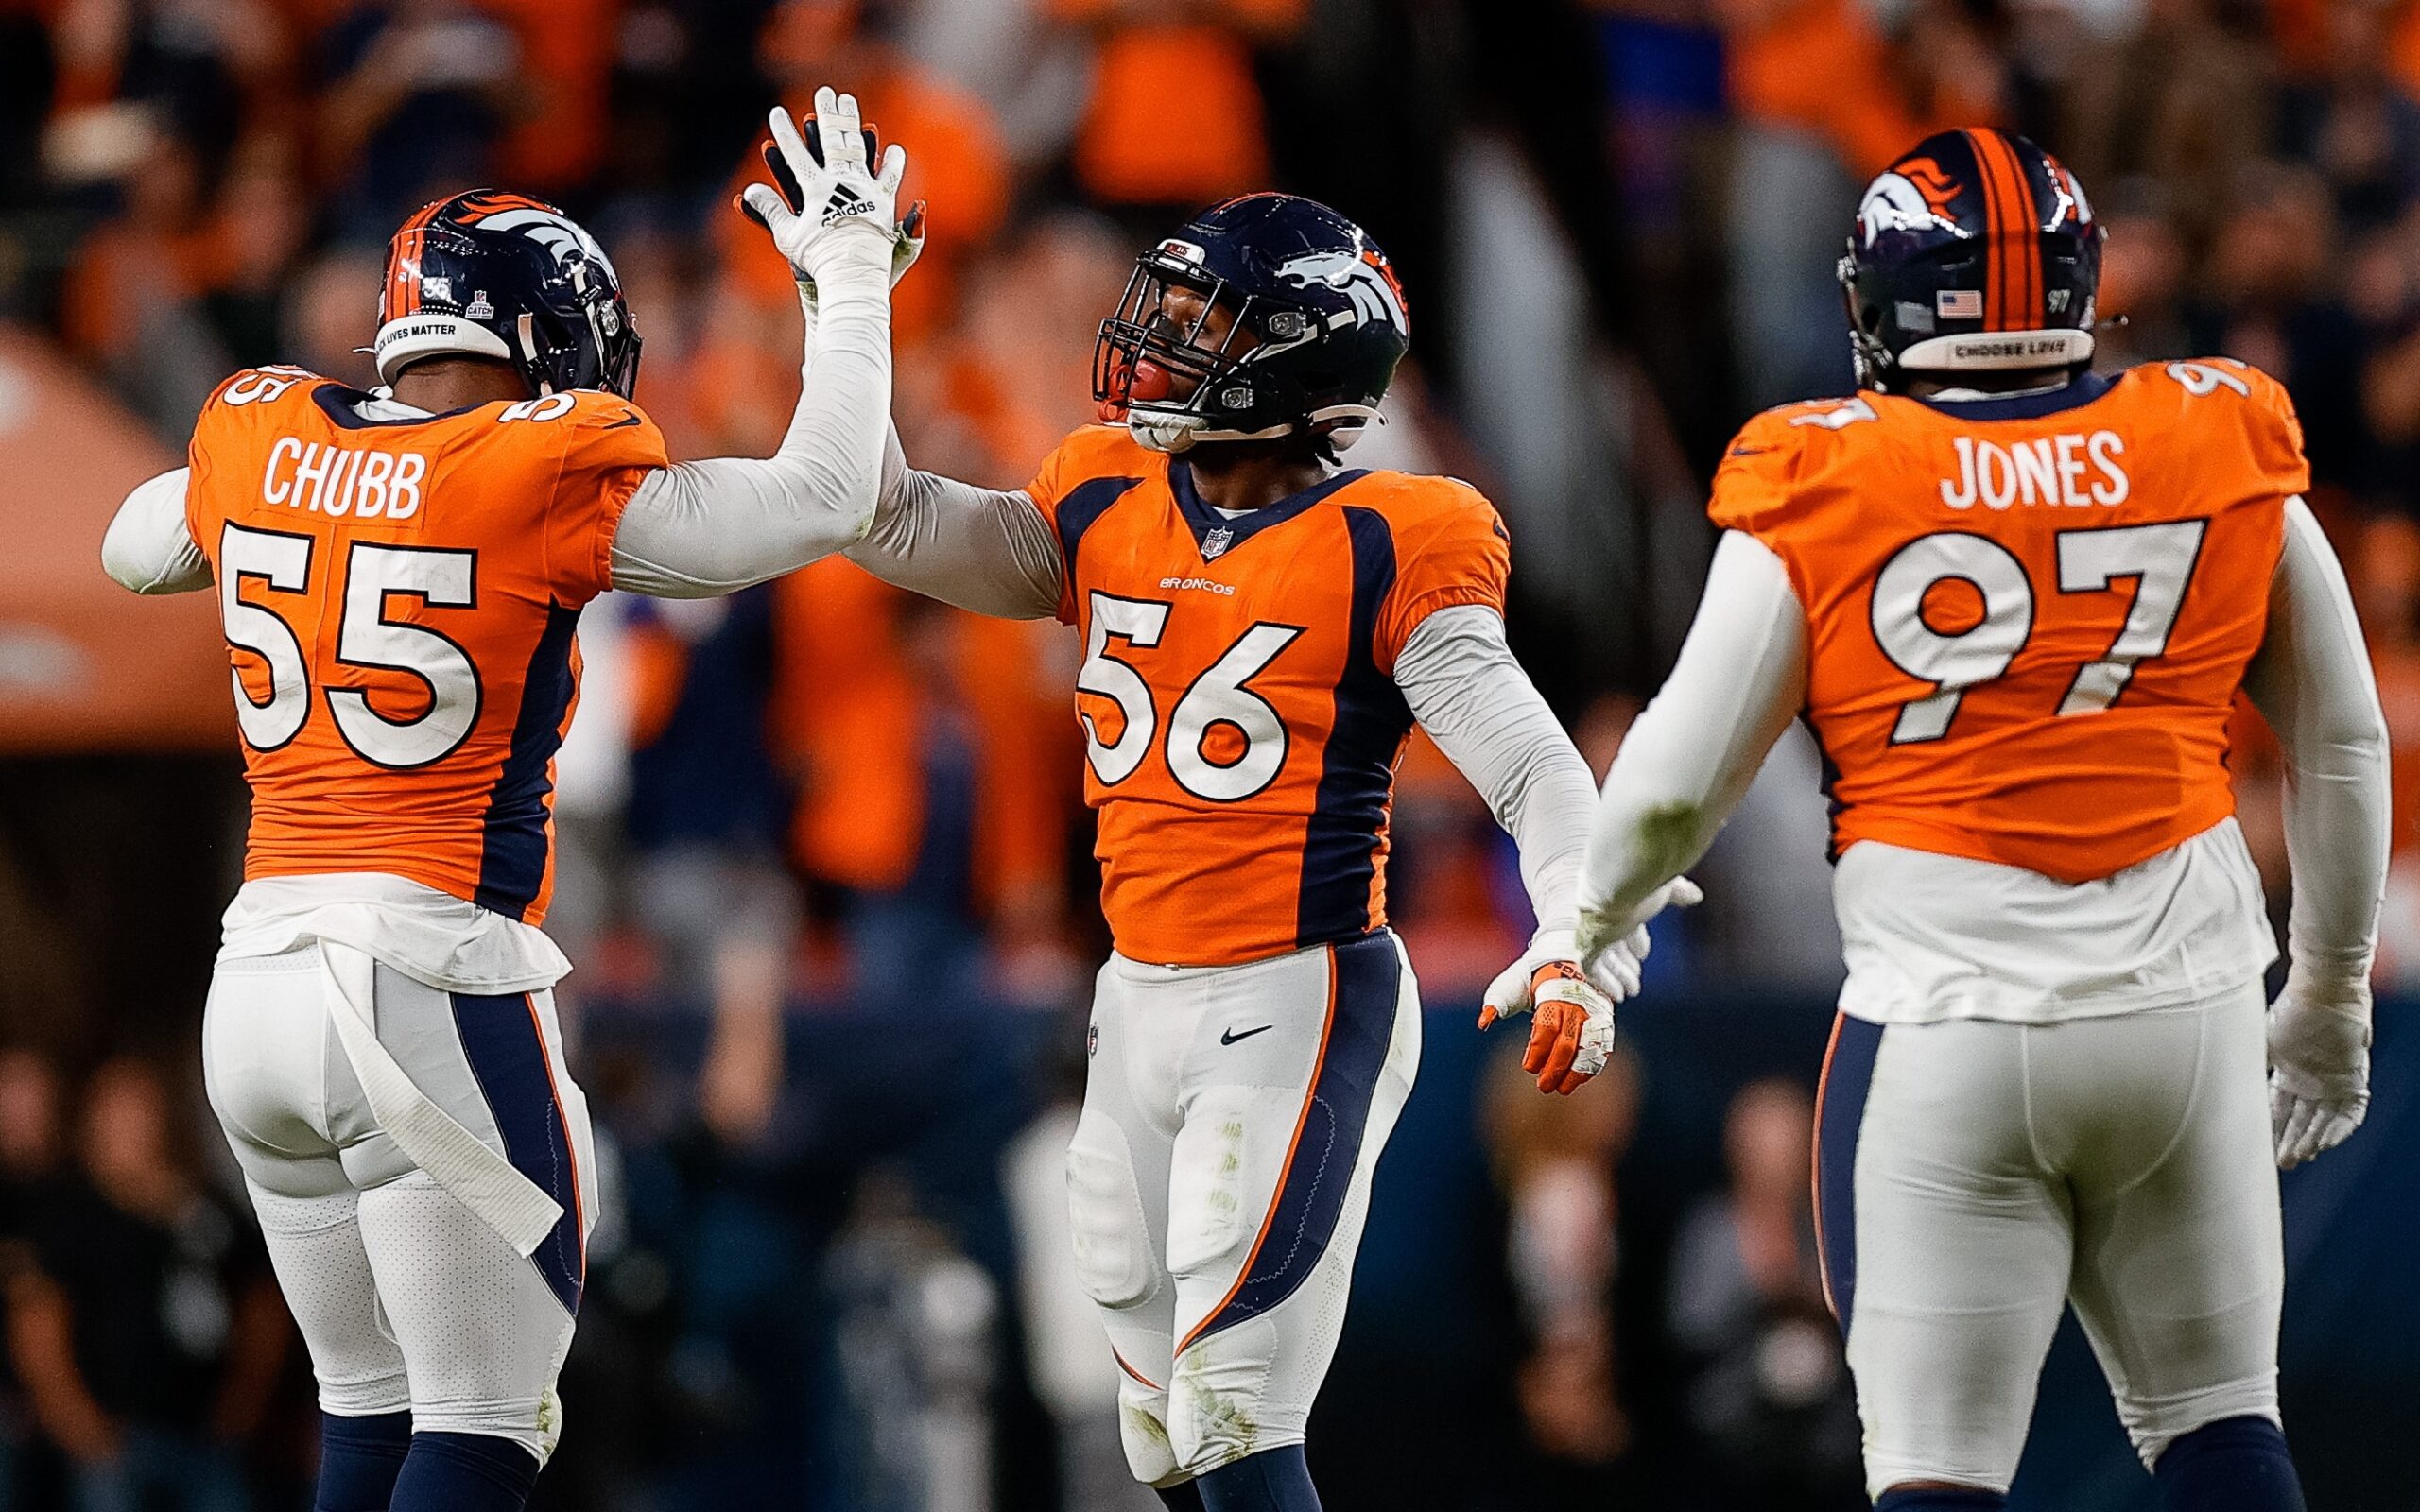 Baron Browning recored his first NFL sack and outperformed expectations in  Thursday night's loss - Mile High Sports